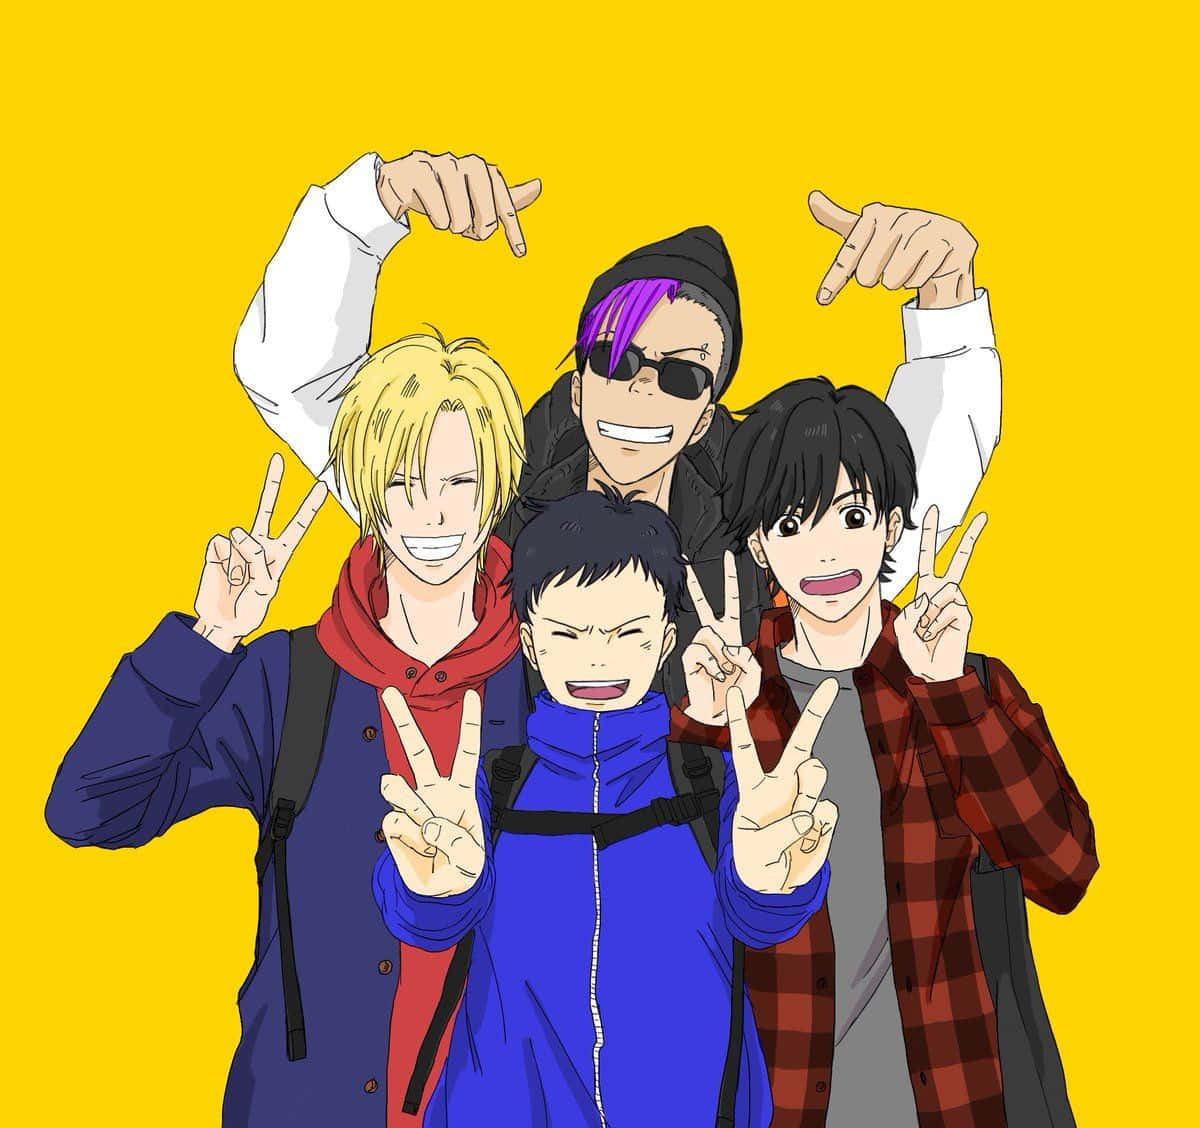 Download “Join Ash Lynx and Eiji Okumura on their journey to uncover the  mysterious drug, Banana Fish, in the new anime series!”